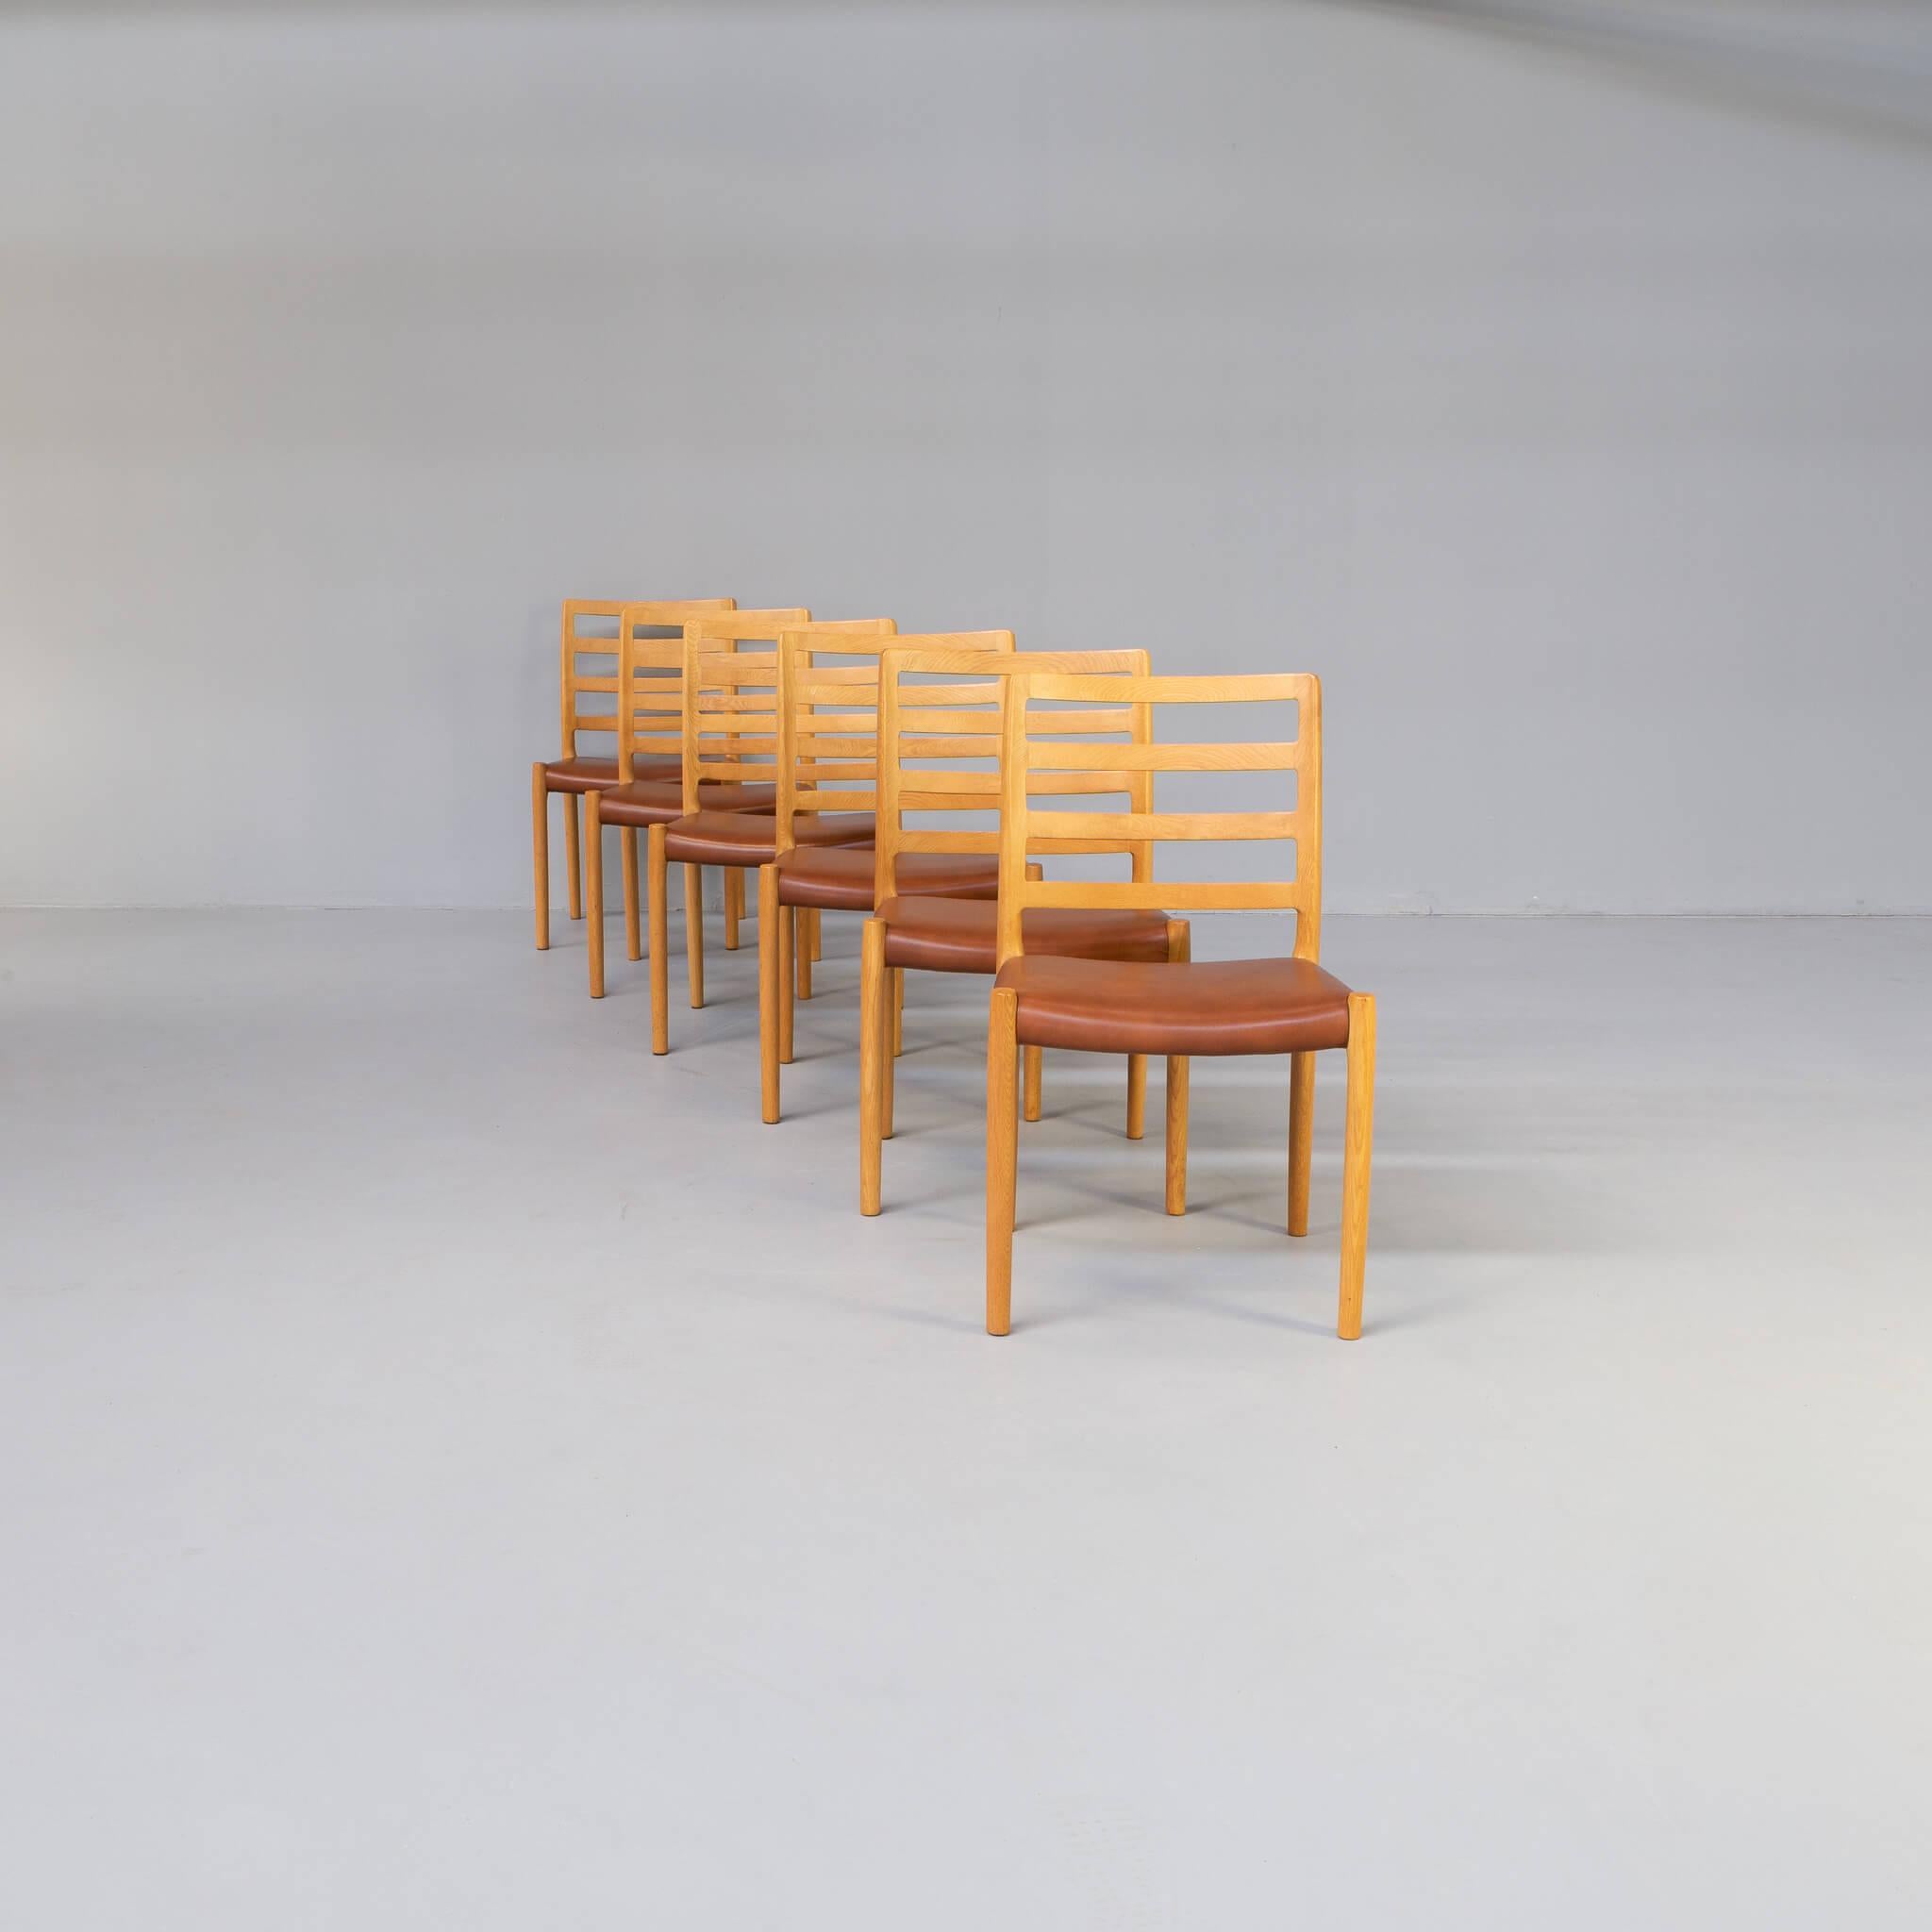 Born in Århus in 1920, the work of Danish designer Niels Otto Møller earned a reputation for consistent excellence in quality and workmanship. Møller’s dedication to his craft stemmed from his cabinetmaking apprenticeship, completed in 1939, which